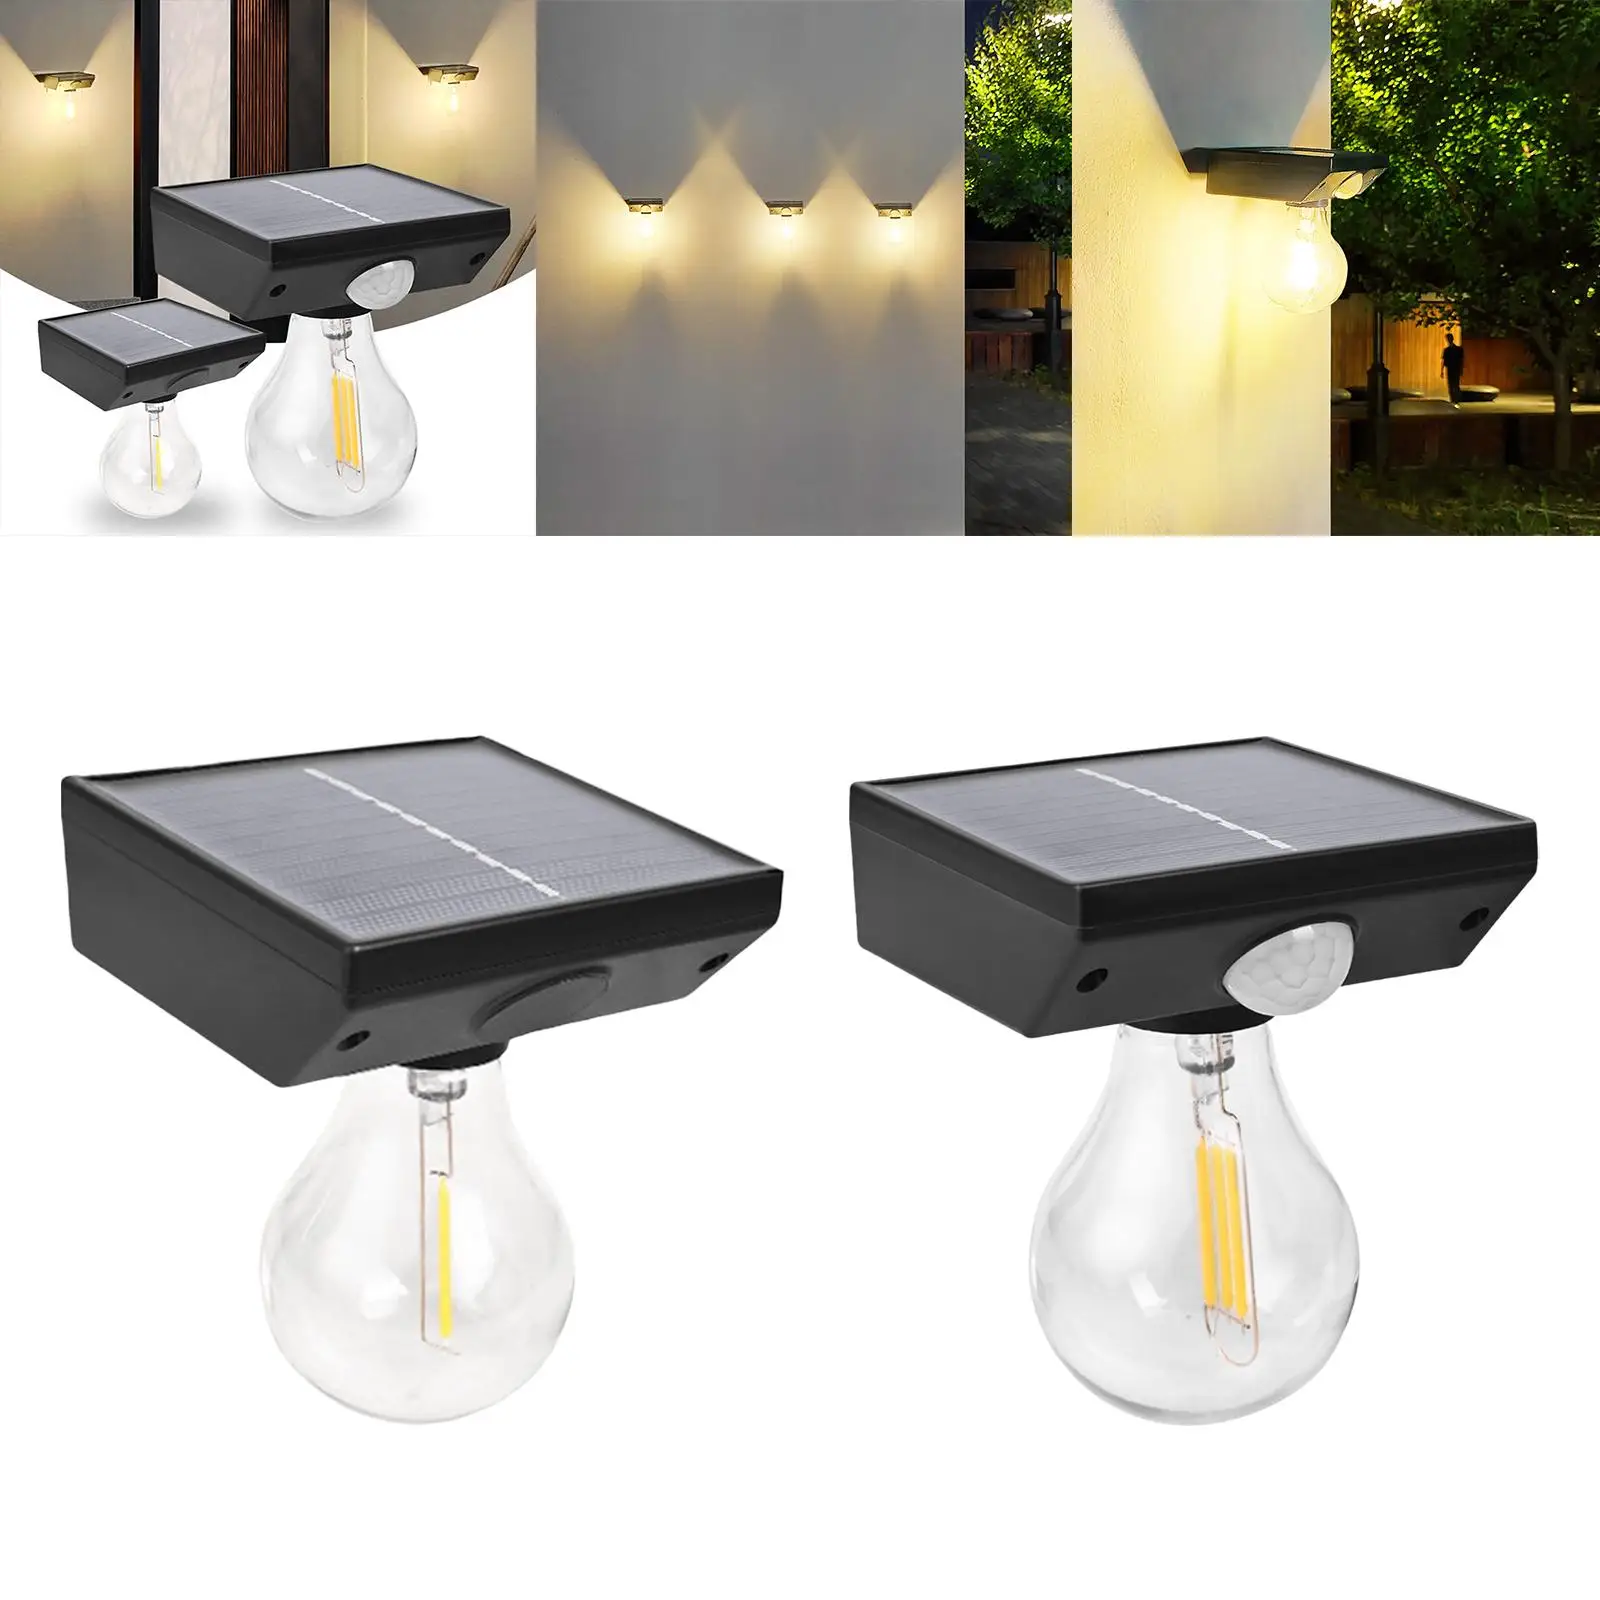 Solar LED Tungsten Filament Bulb Automatic Light Sensors Lamps Bulbs for Fence Outdoor